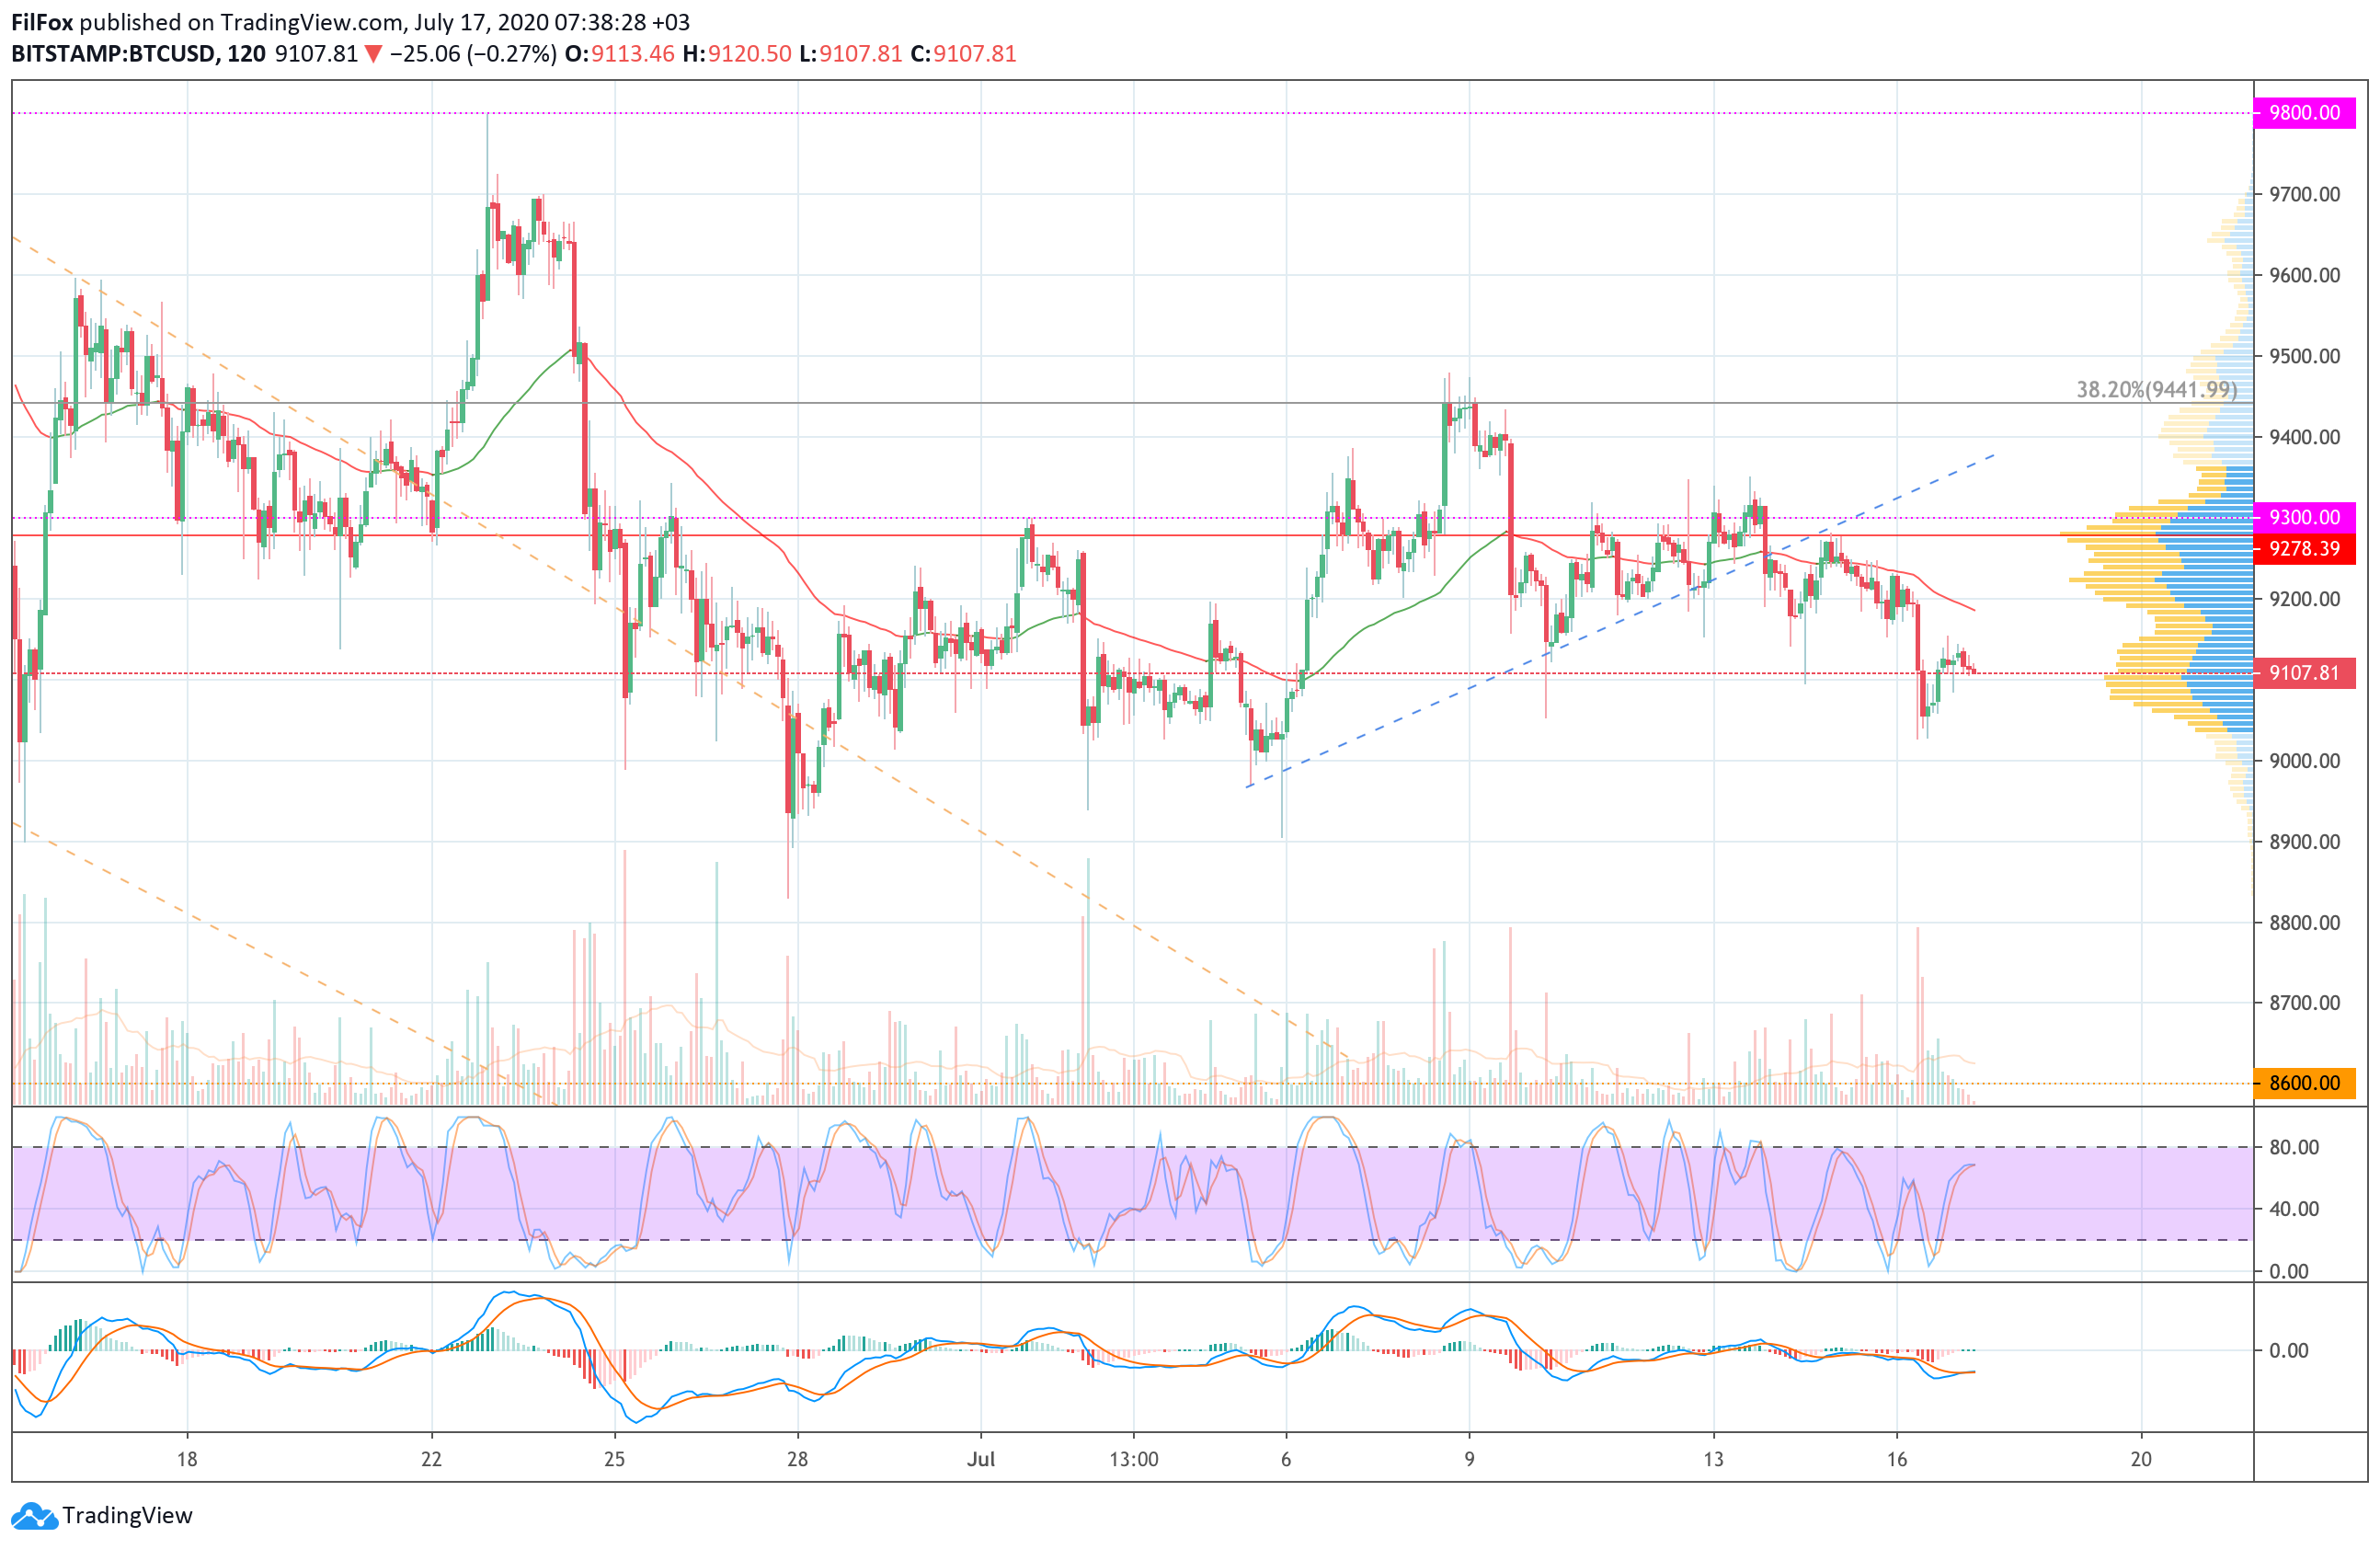 Analysis of prices for Bitcoin, Ethereum, XRP for 07/17/2020